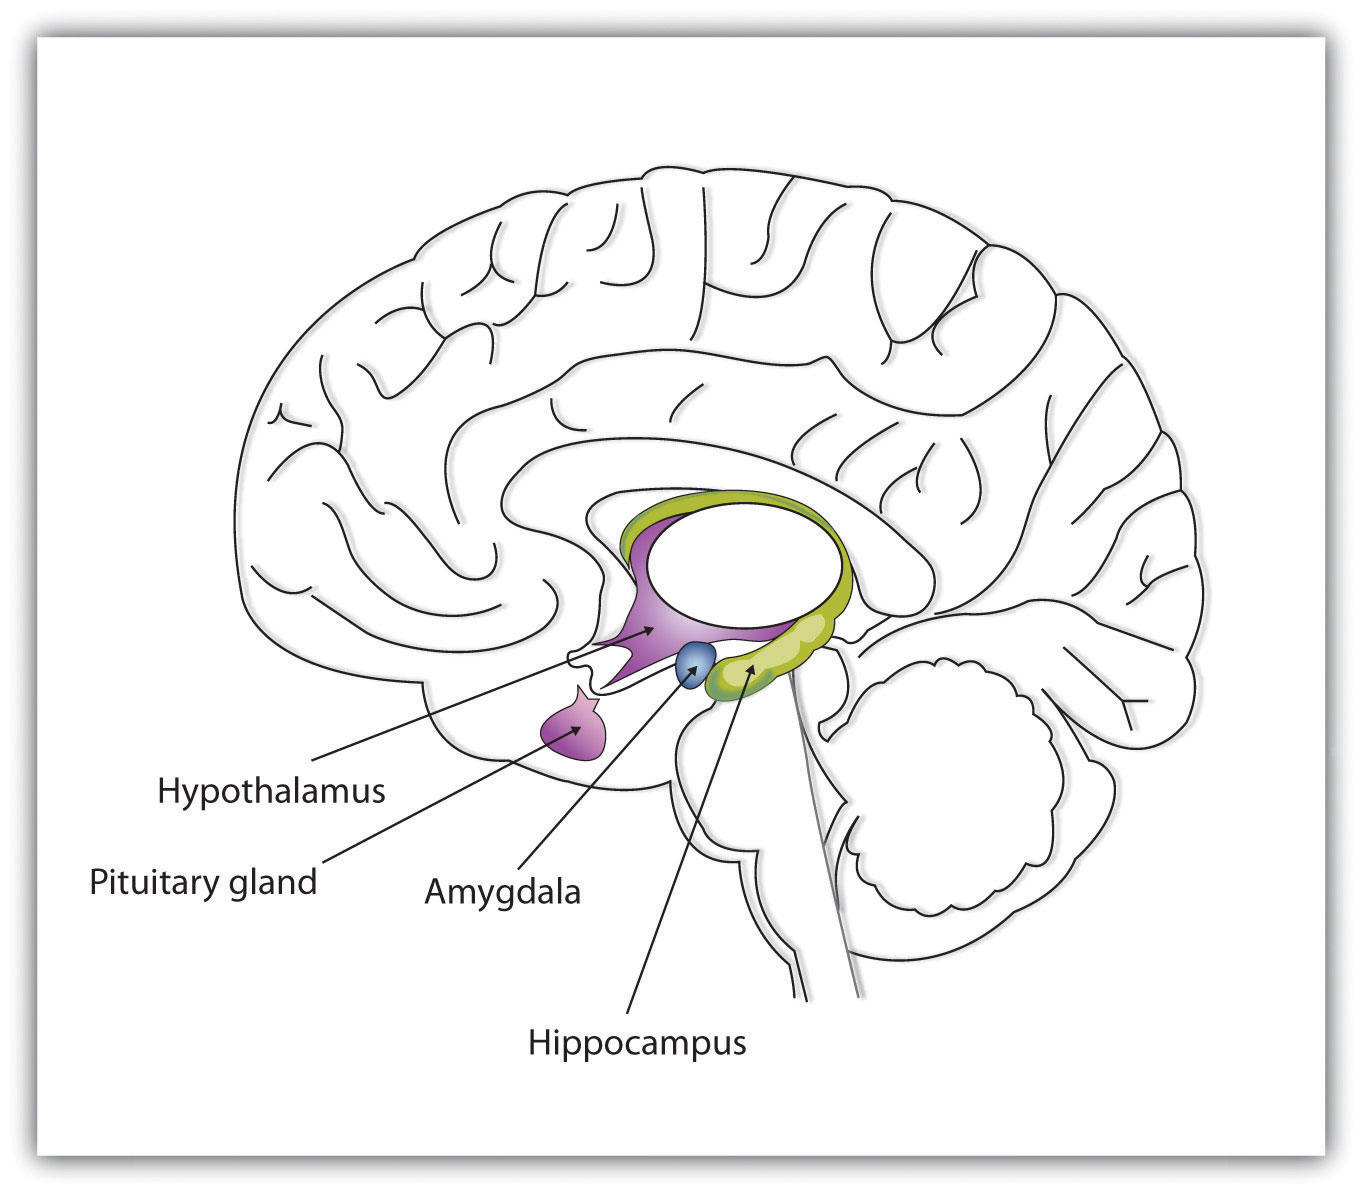 The limbic system is a part of the brain that includes the amygdala. The amygdala is an important regulator of emotions.